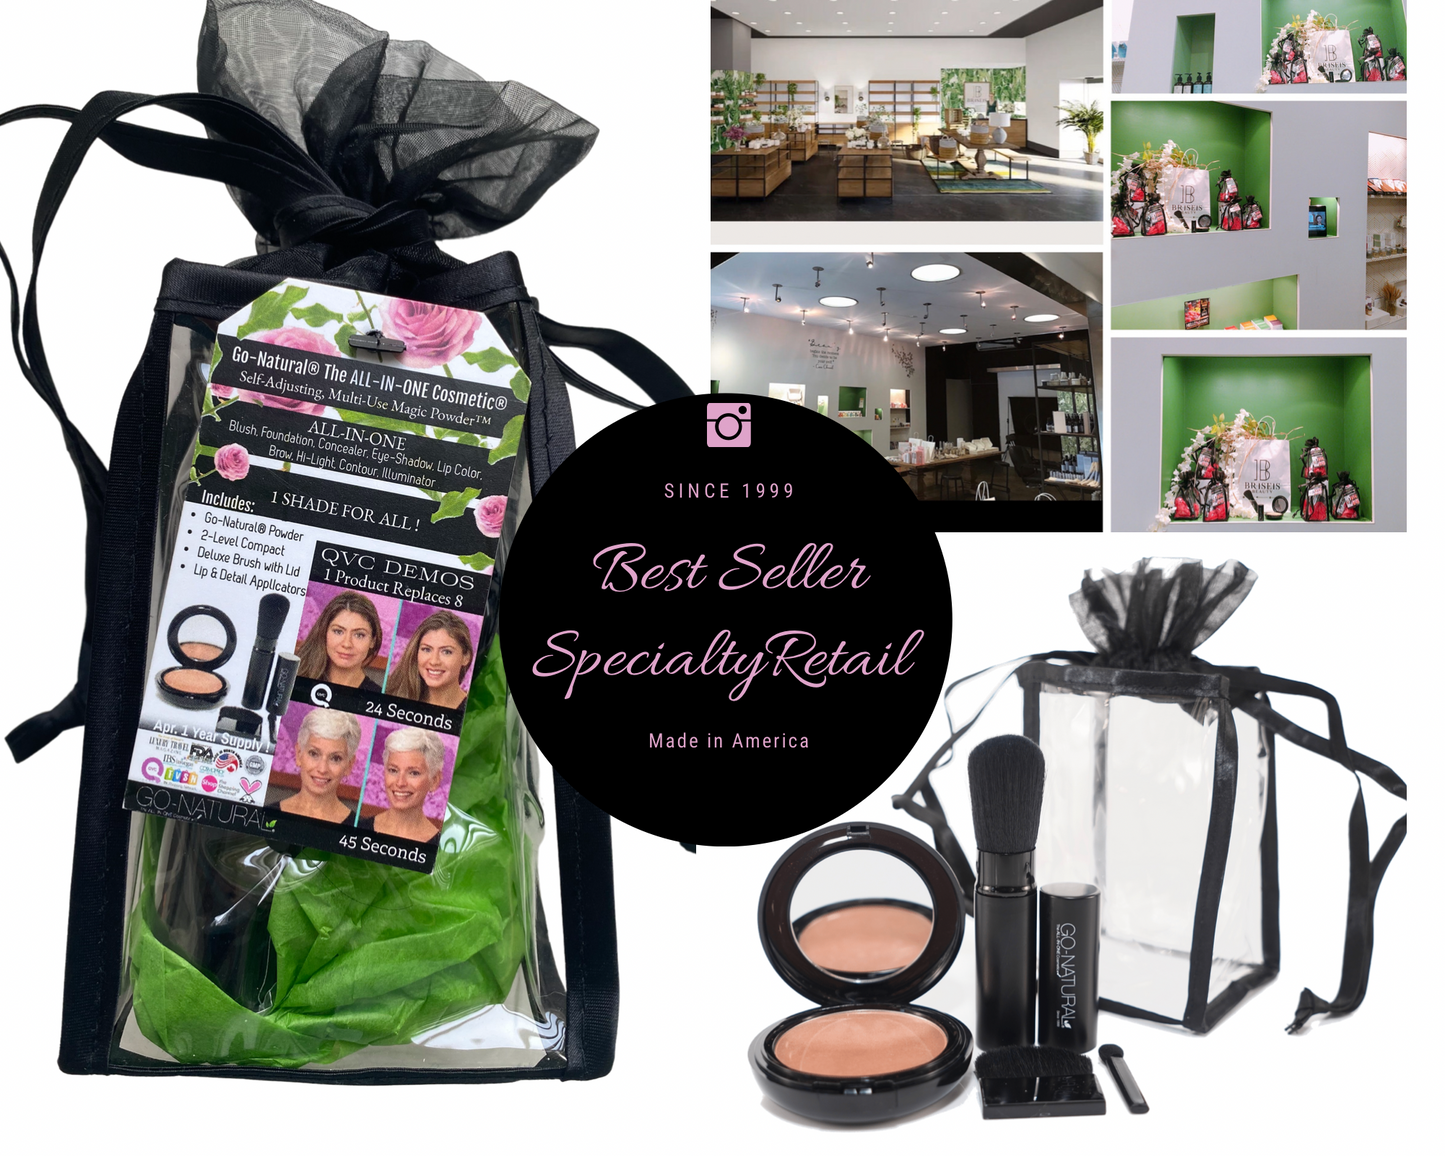 Wholesale Specialty Retail - RETAIL PACKAGING - Wholesale Best Seller  GO-NATURAL® ALL-IN-ONE Cosmetic® 1-Shade Multi-Use "Magic Powder" ™  Manufacturer Direct Specialty Retail & Professional Beauty Exclusive 